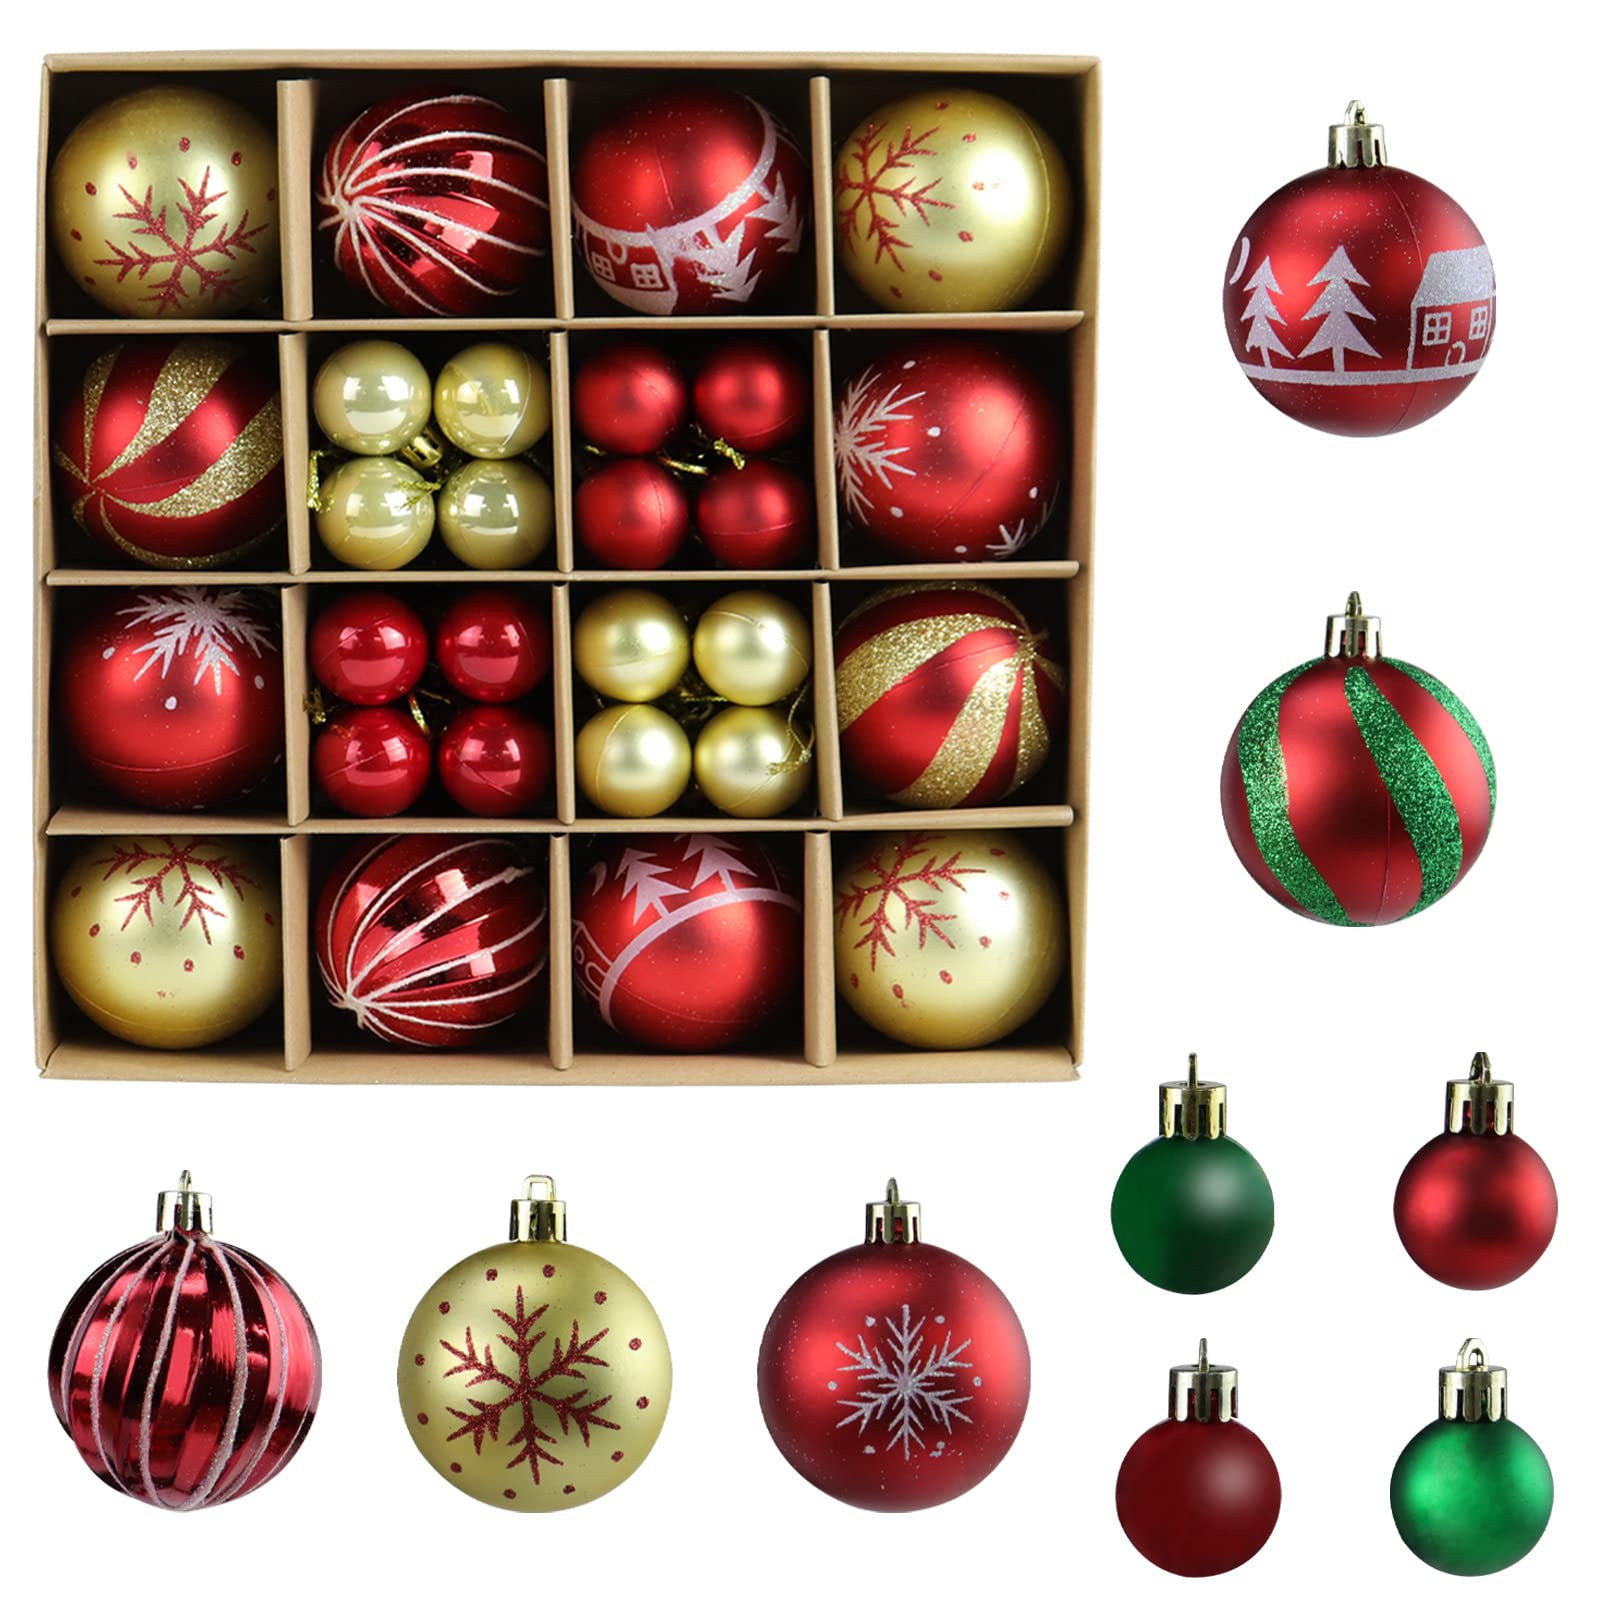 Christmas Balls,Christmas Tree Decorations Ornaments Set,44pcs Shatterproof Plastic Decorative Hanging Ball for Xmas Party Holiday Wedding (Red and Gold)